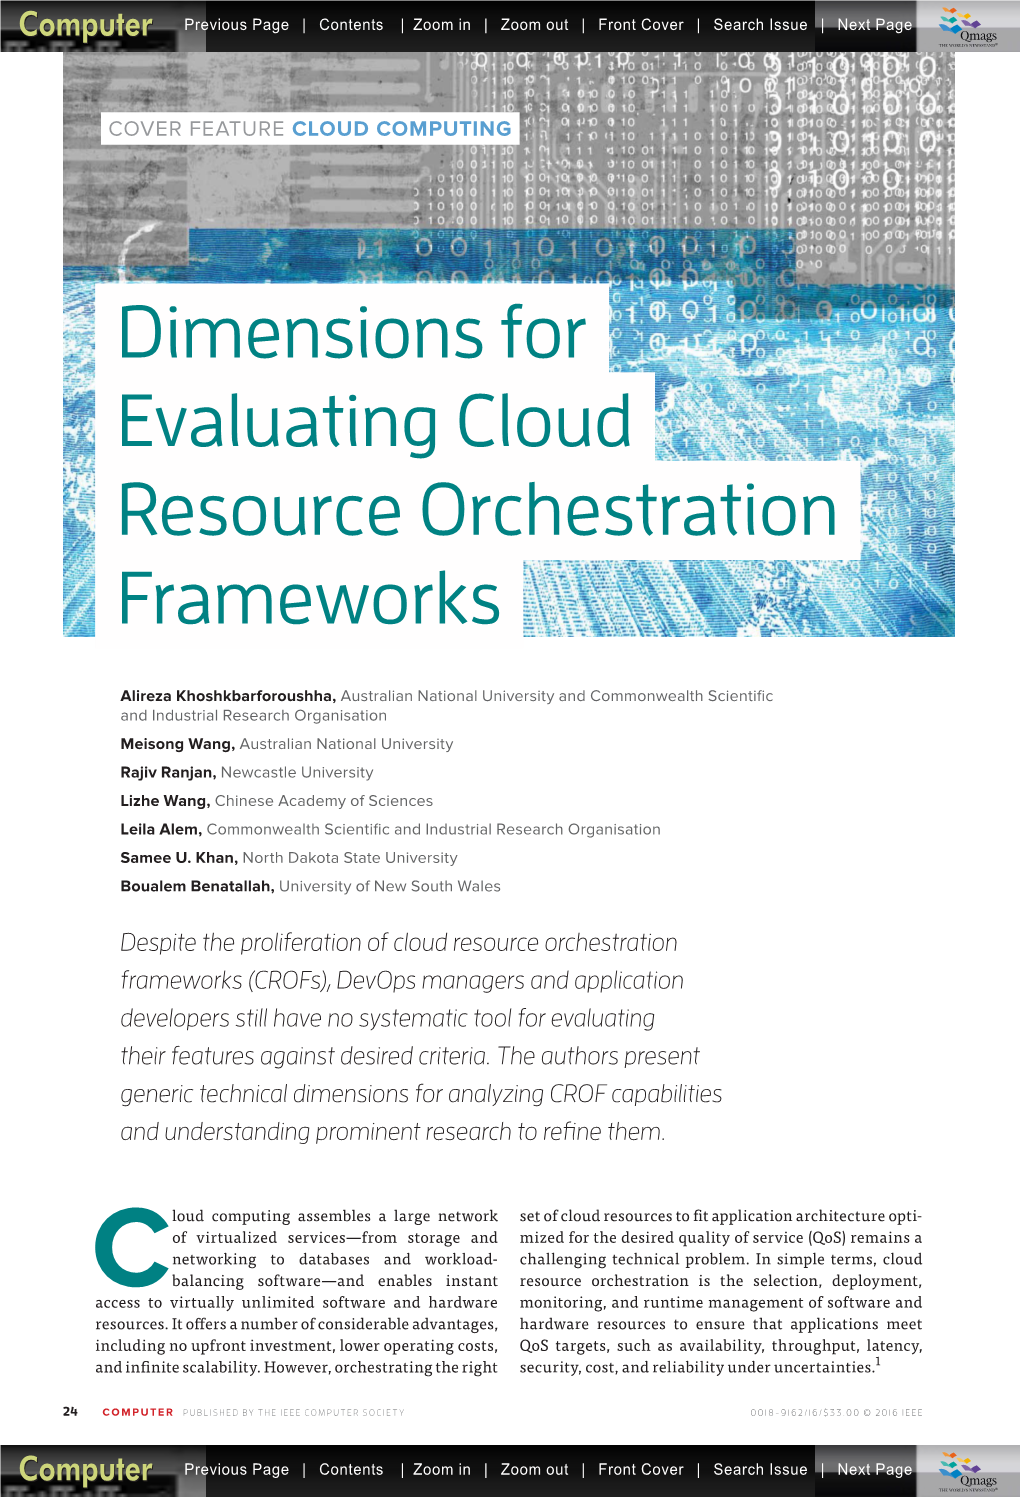 Dimensions for Evaluating Cloud Resource Orchestration Frameworks